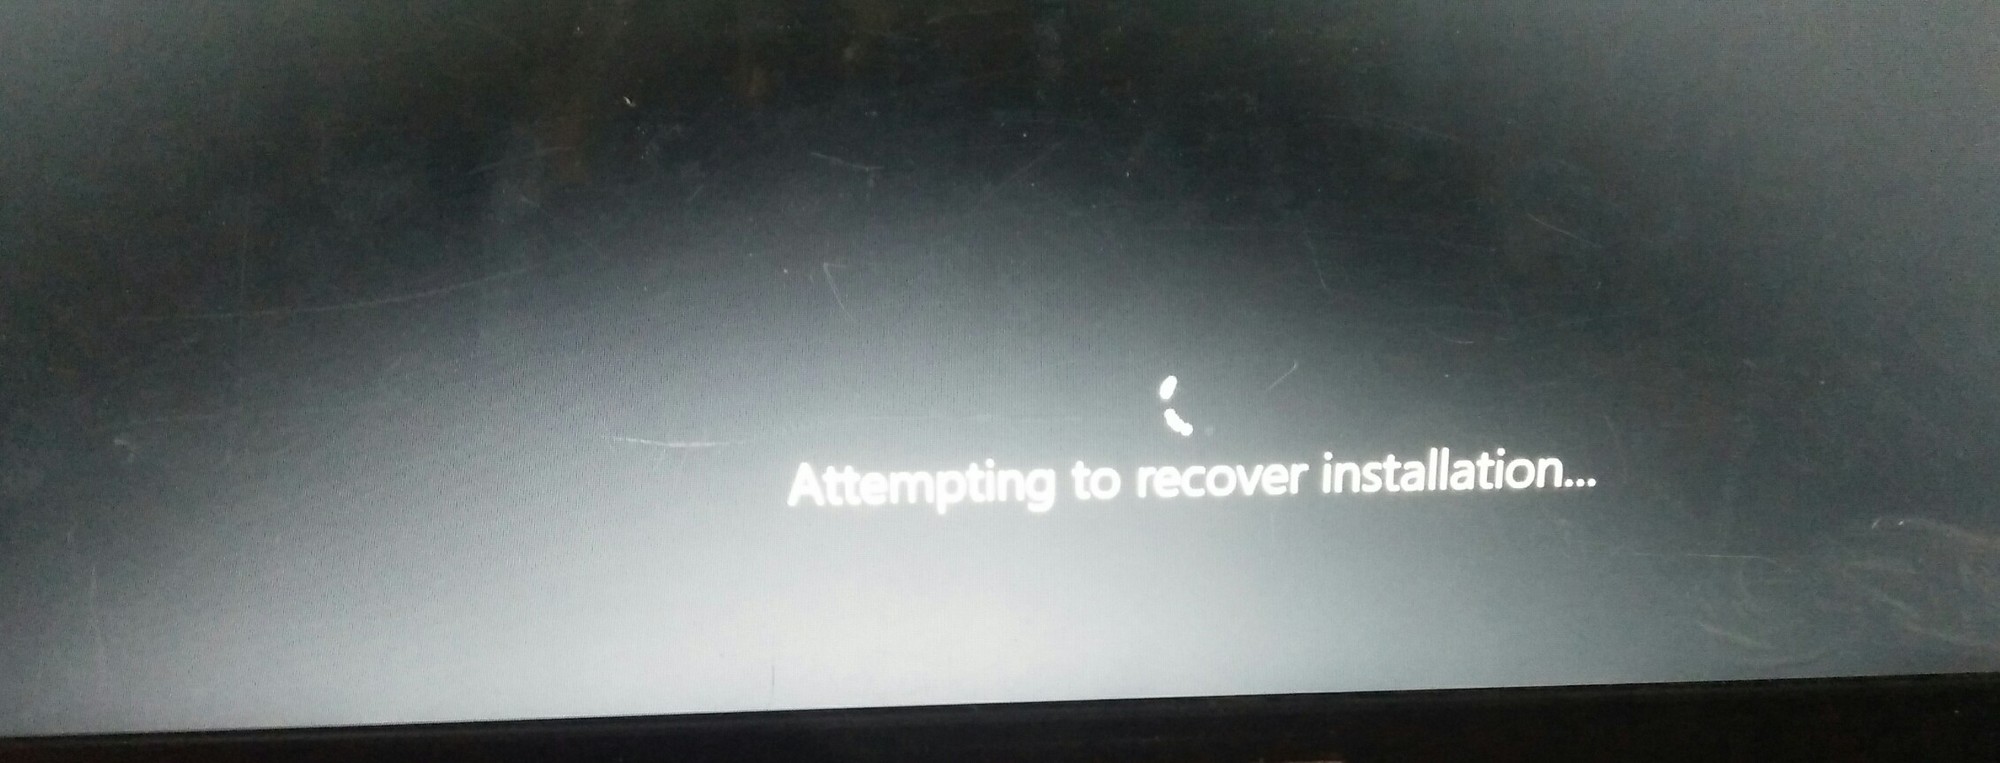 My windows laptop struck " Attempting to recover installation " and " undoing changes made... 8a72f089-6cbb-461a-8e07-5f401bddc861?upload=true.jpg